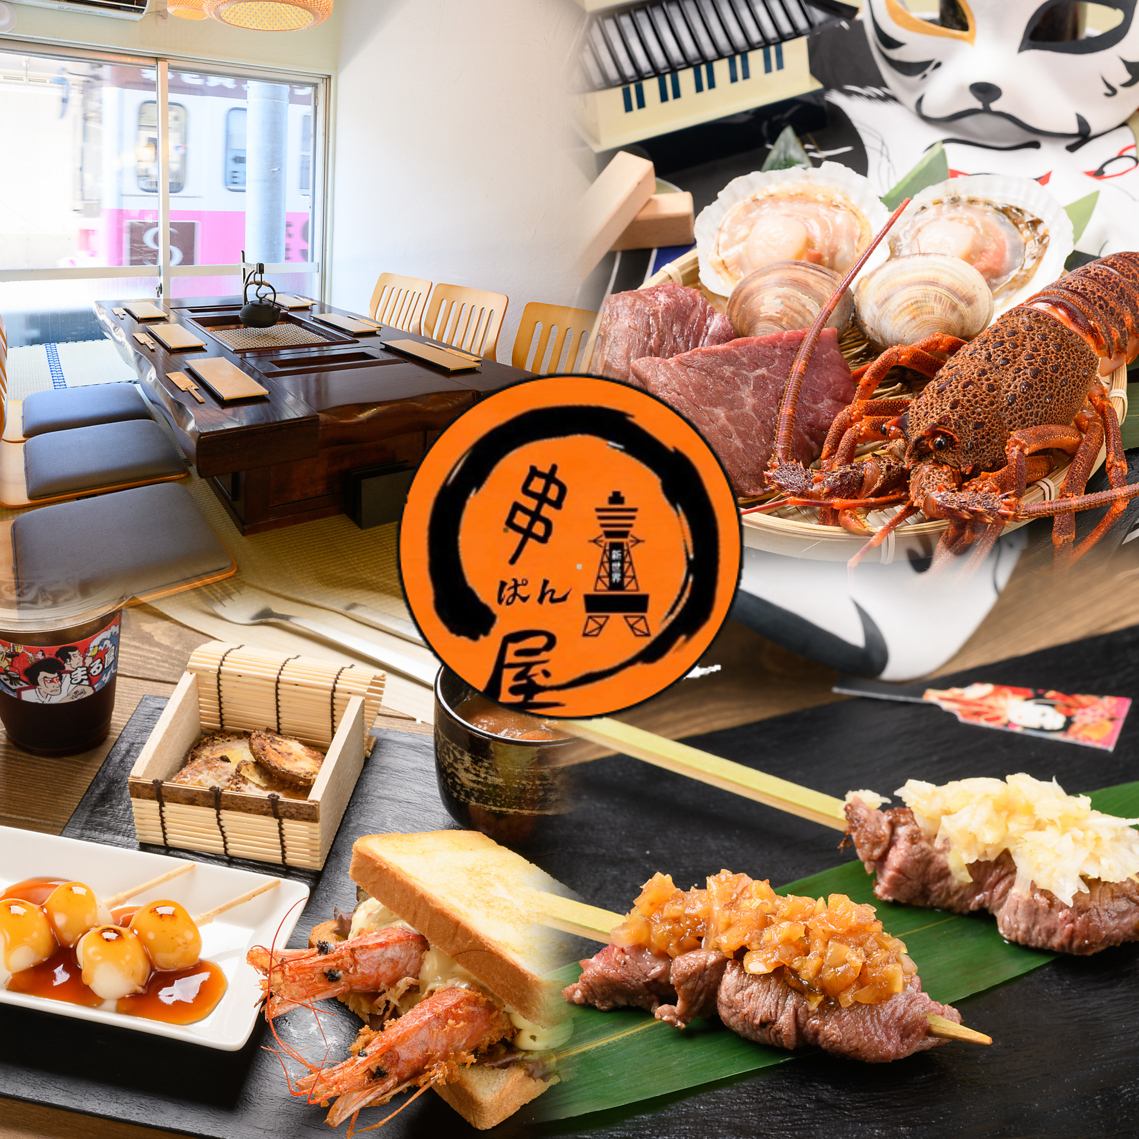 You can have lunch or eat while looking at Tsutenkaku. We have a wide variety of meat and seafood dishes!